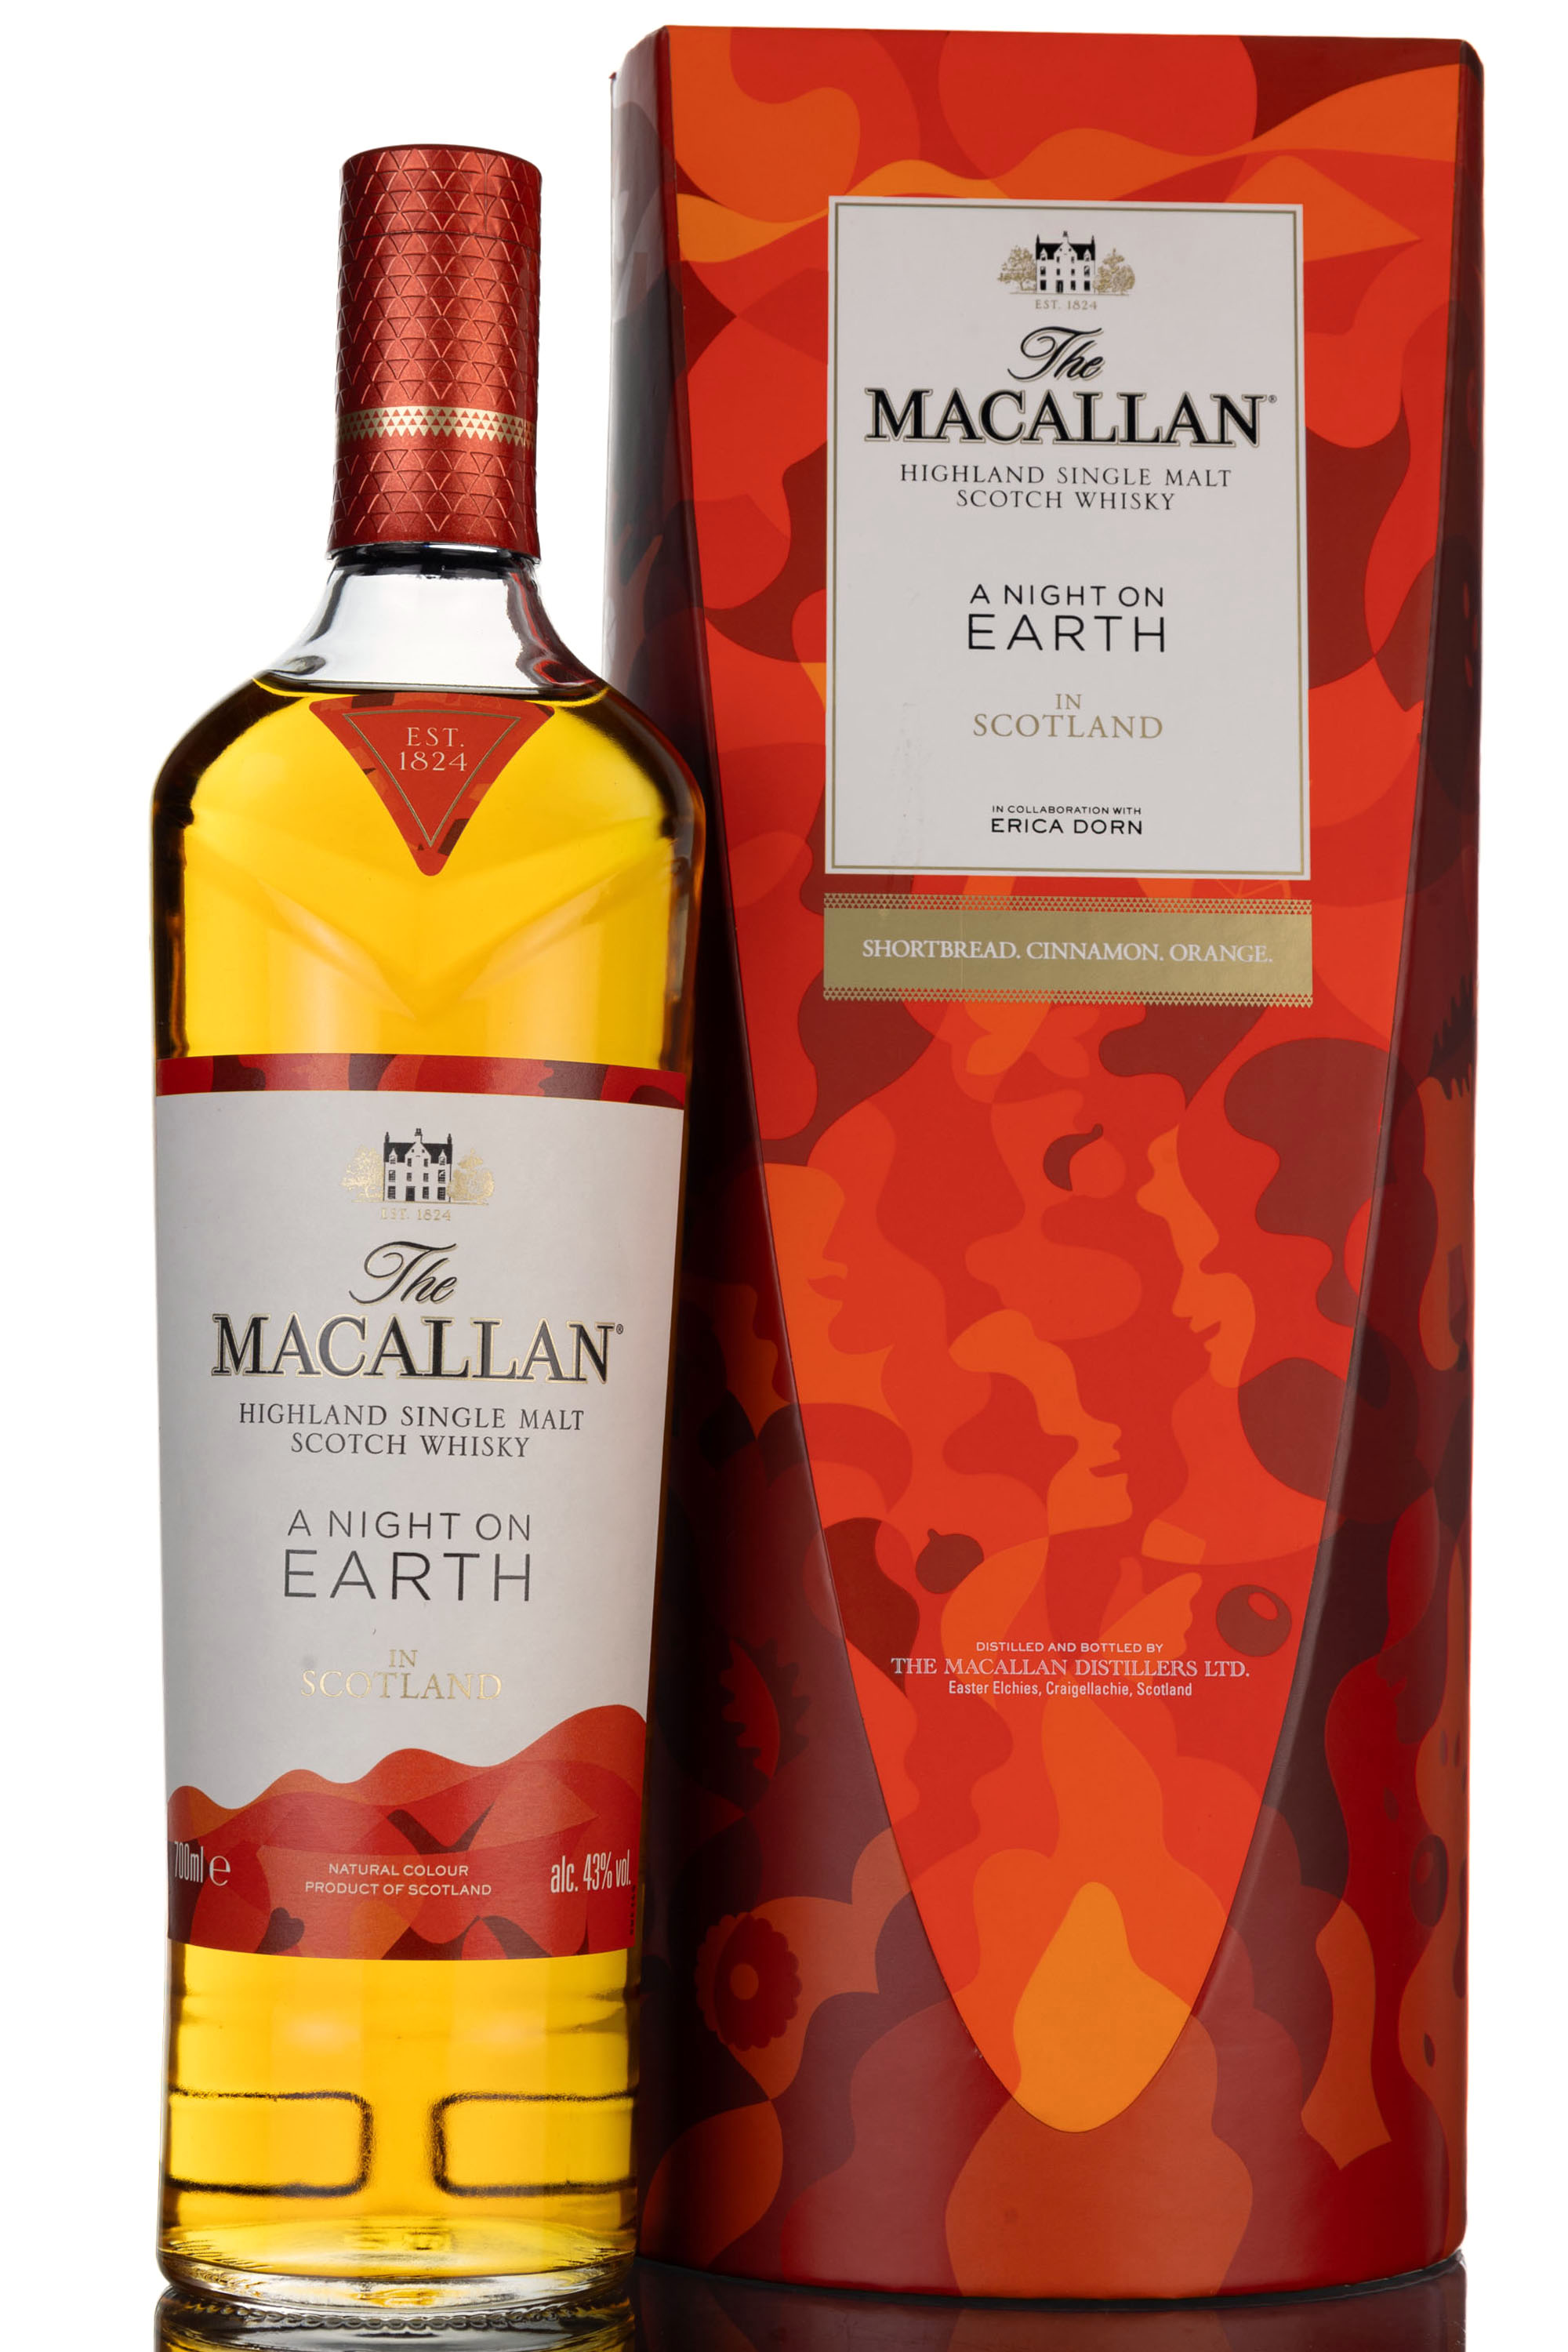 Macallan A Night On Earth - Erica Dorn - 2nd Edition - 2022 Release